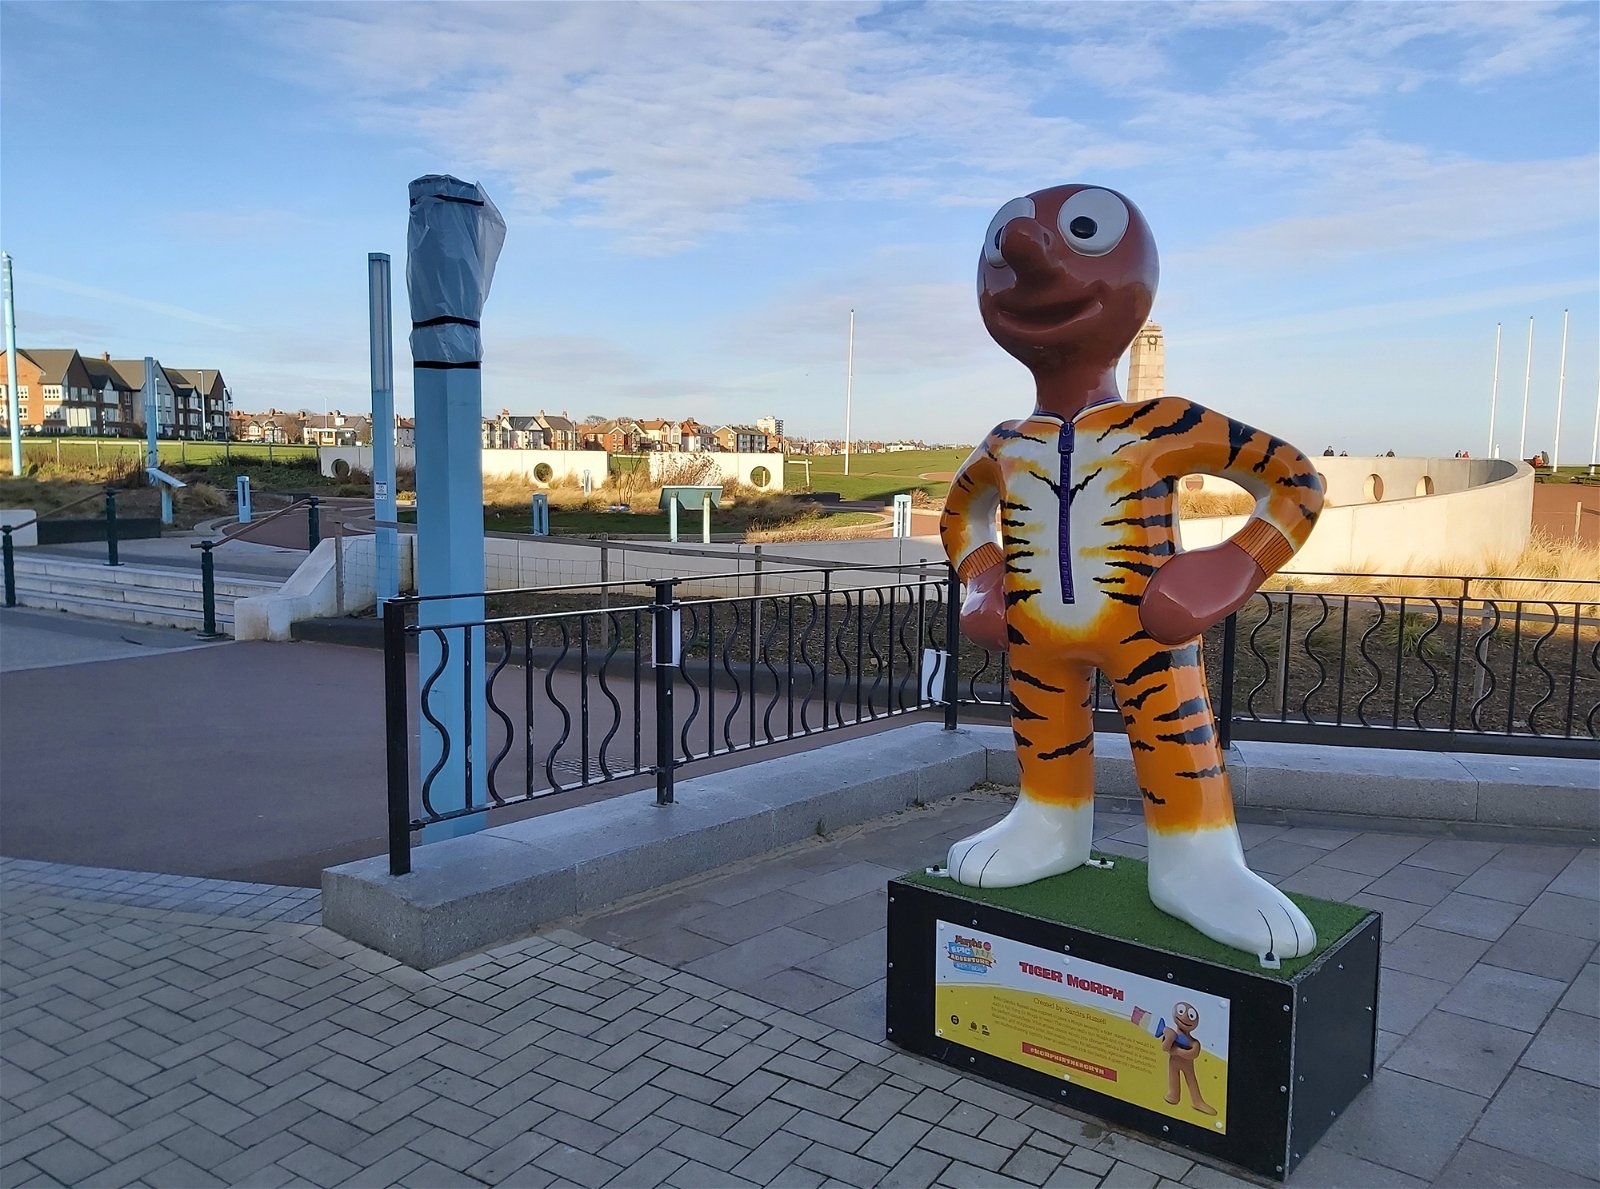 Morph in the North Art Trail